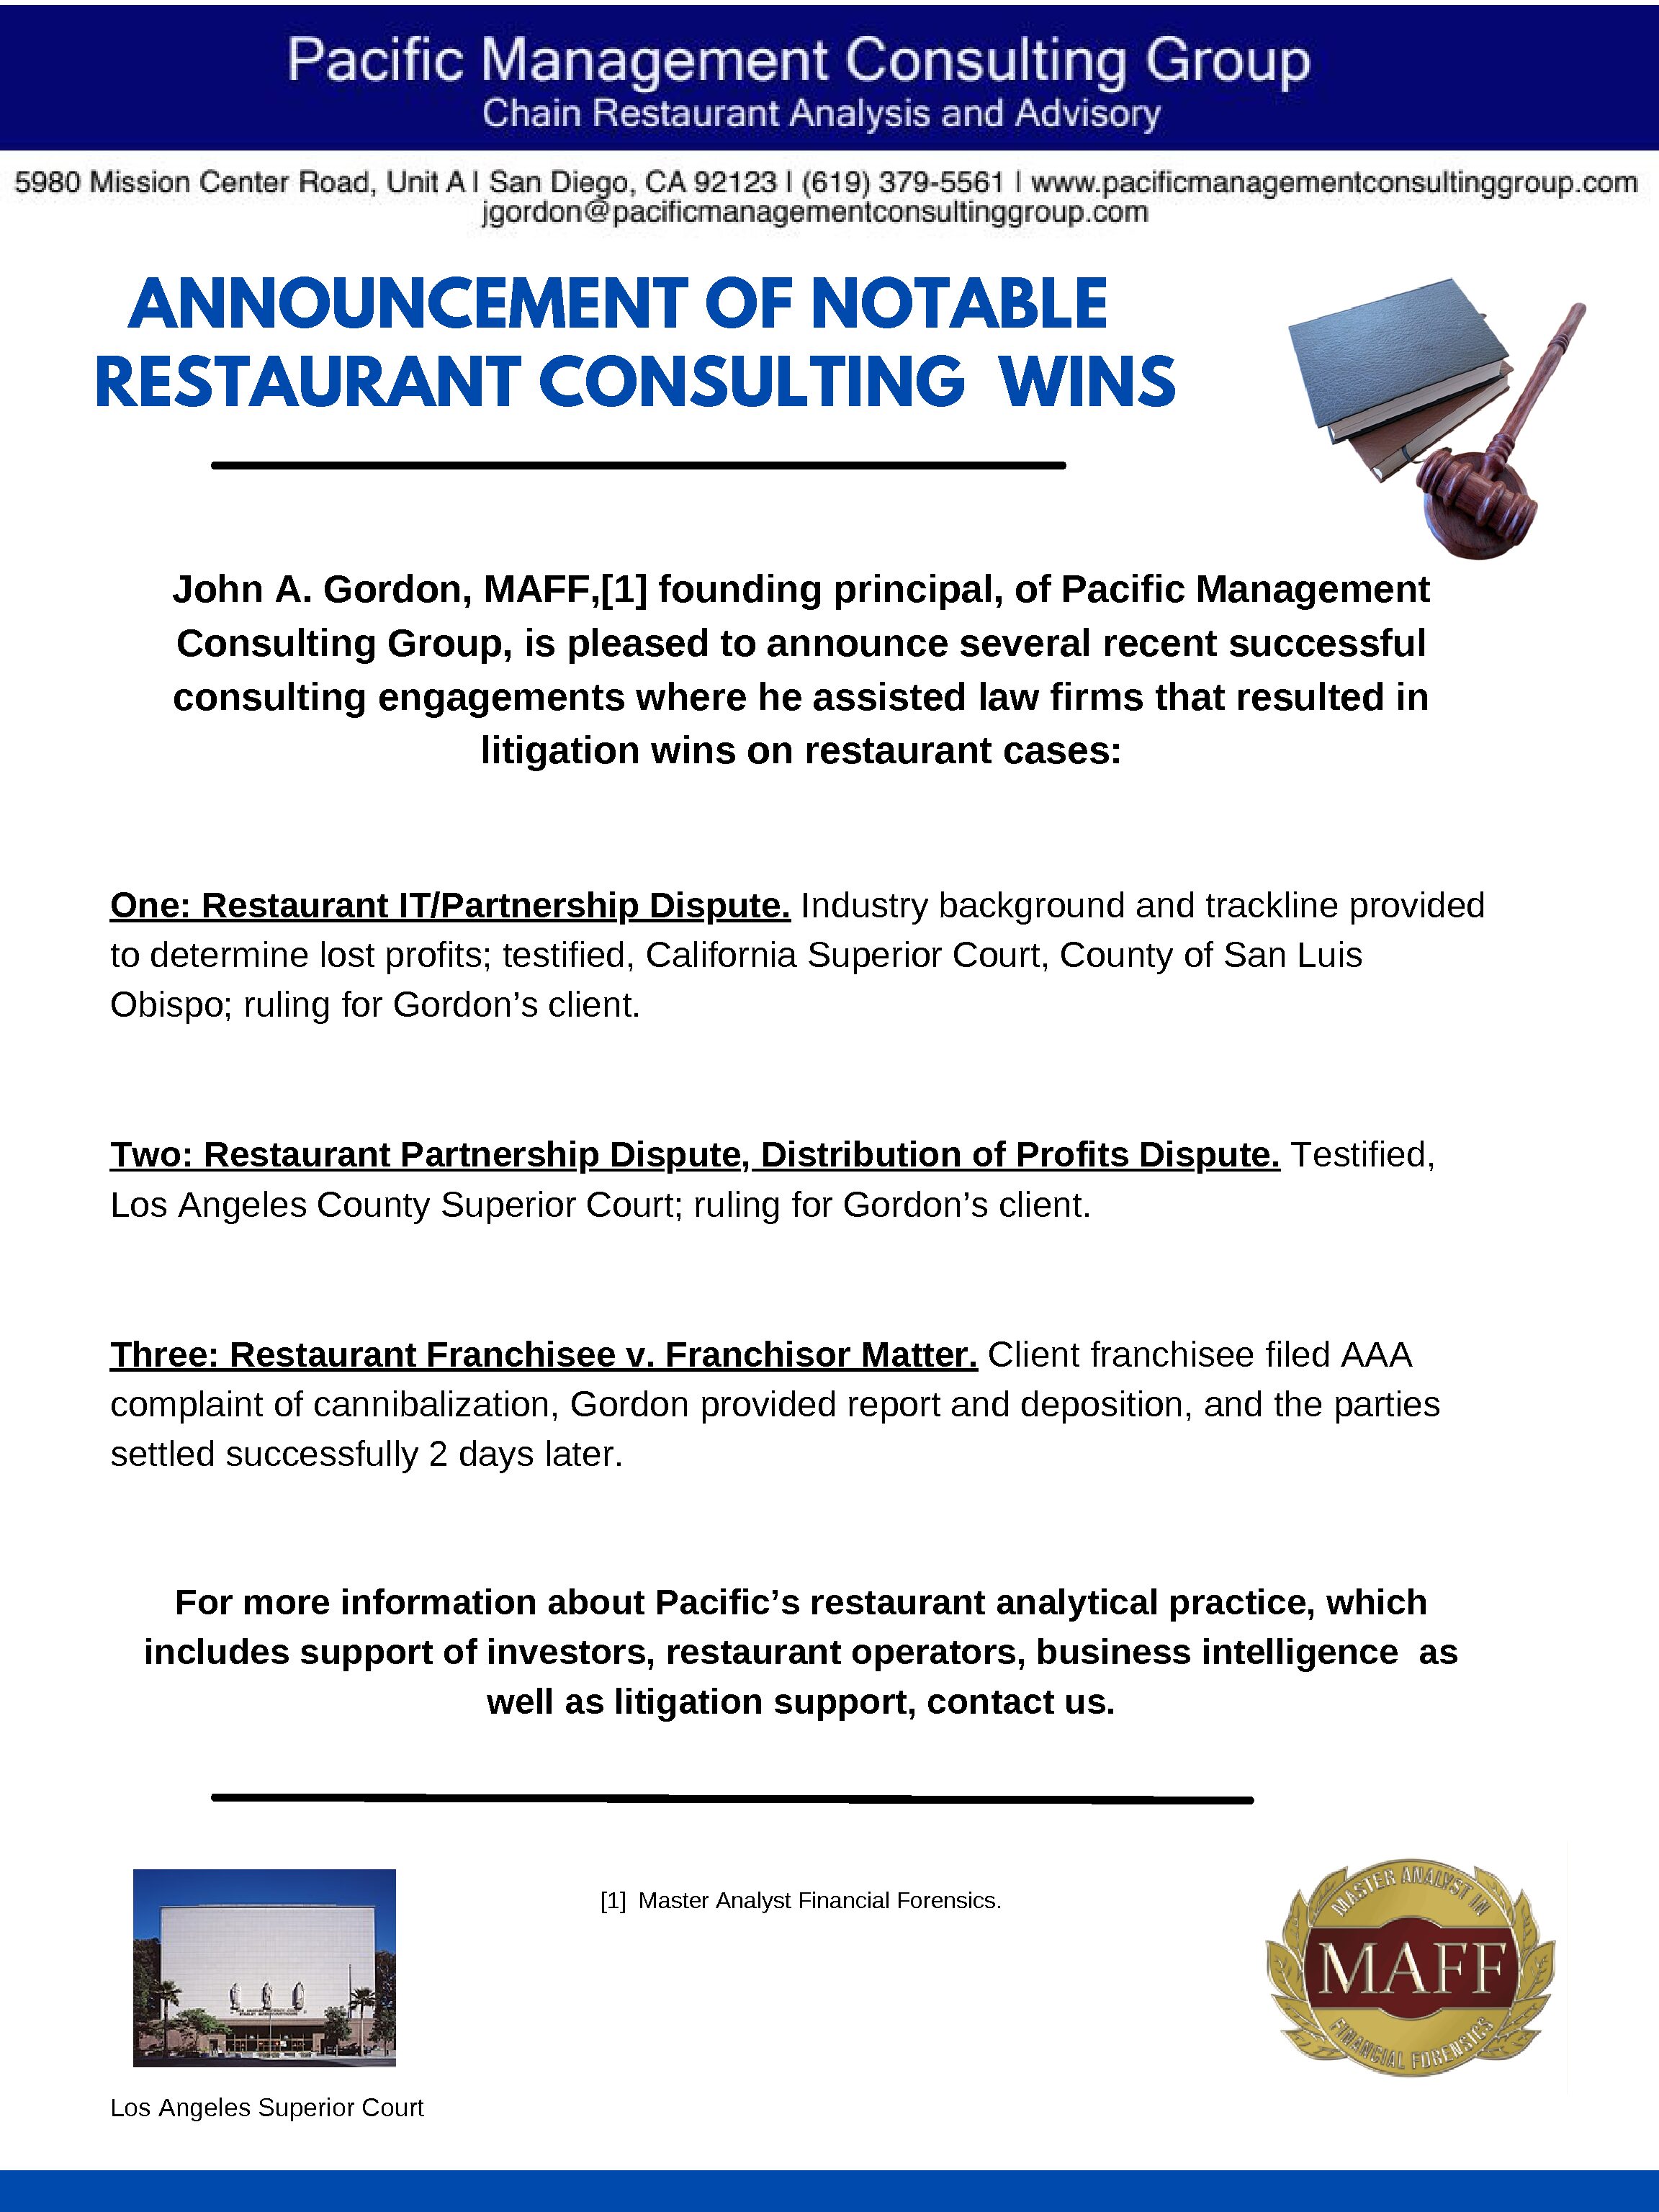 Announcement of Notable Restaurant Consulting Wins